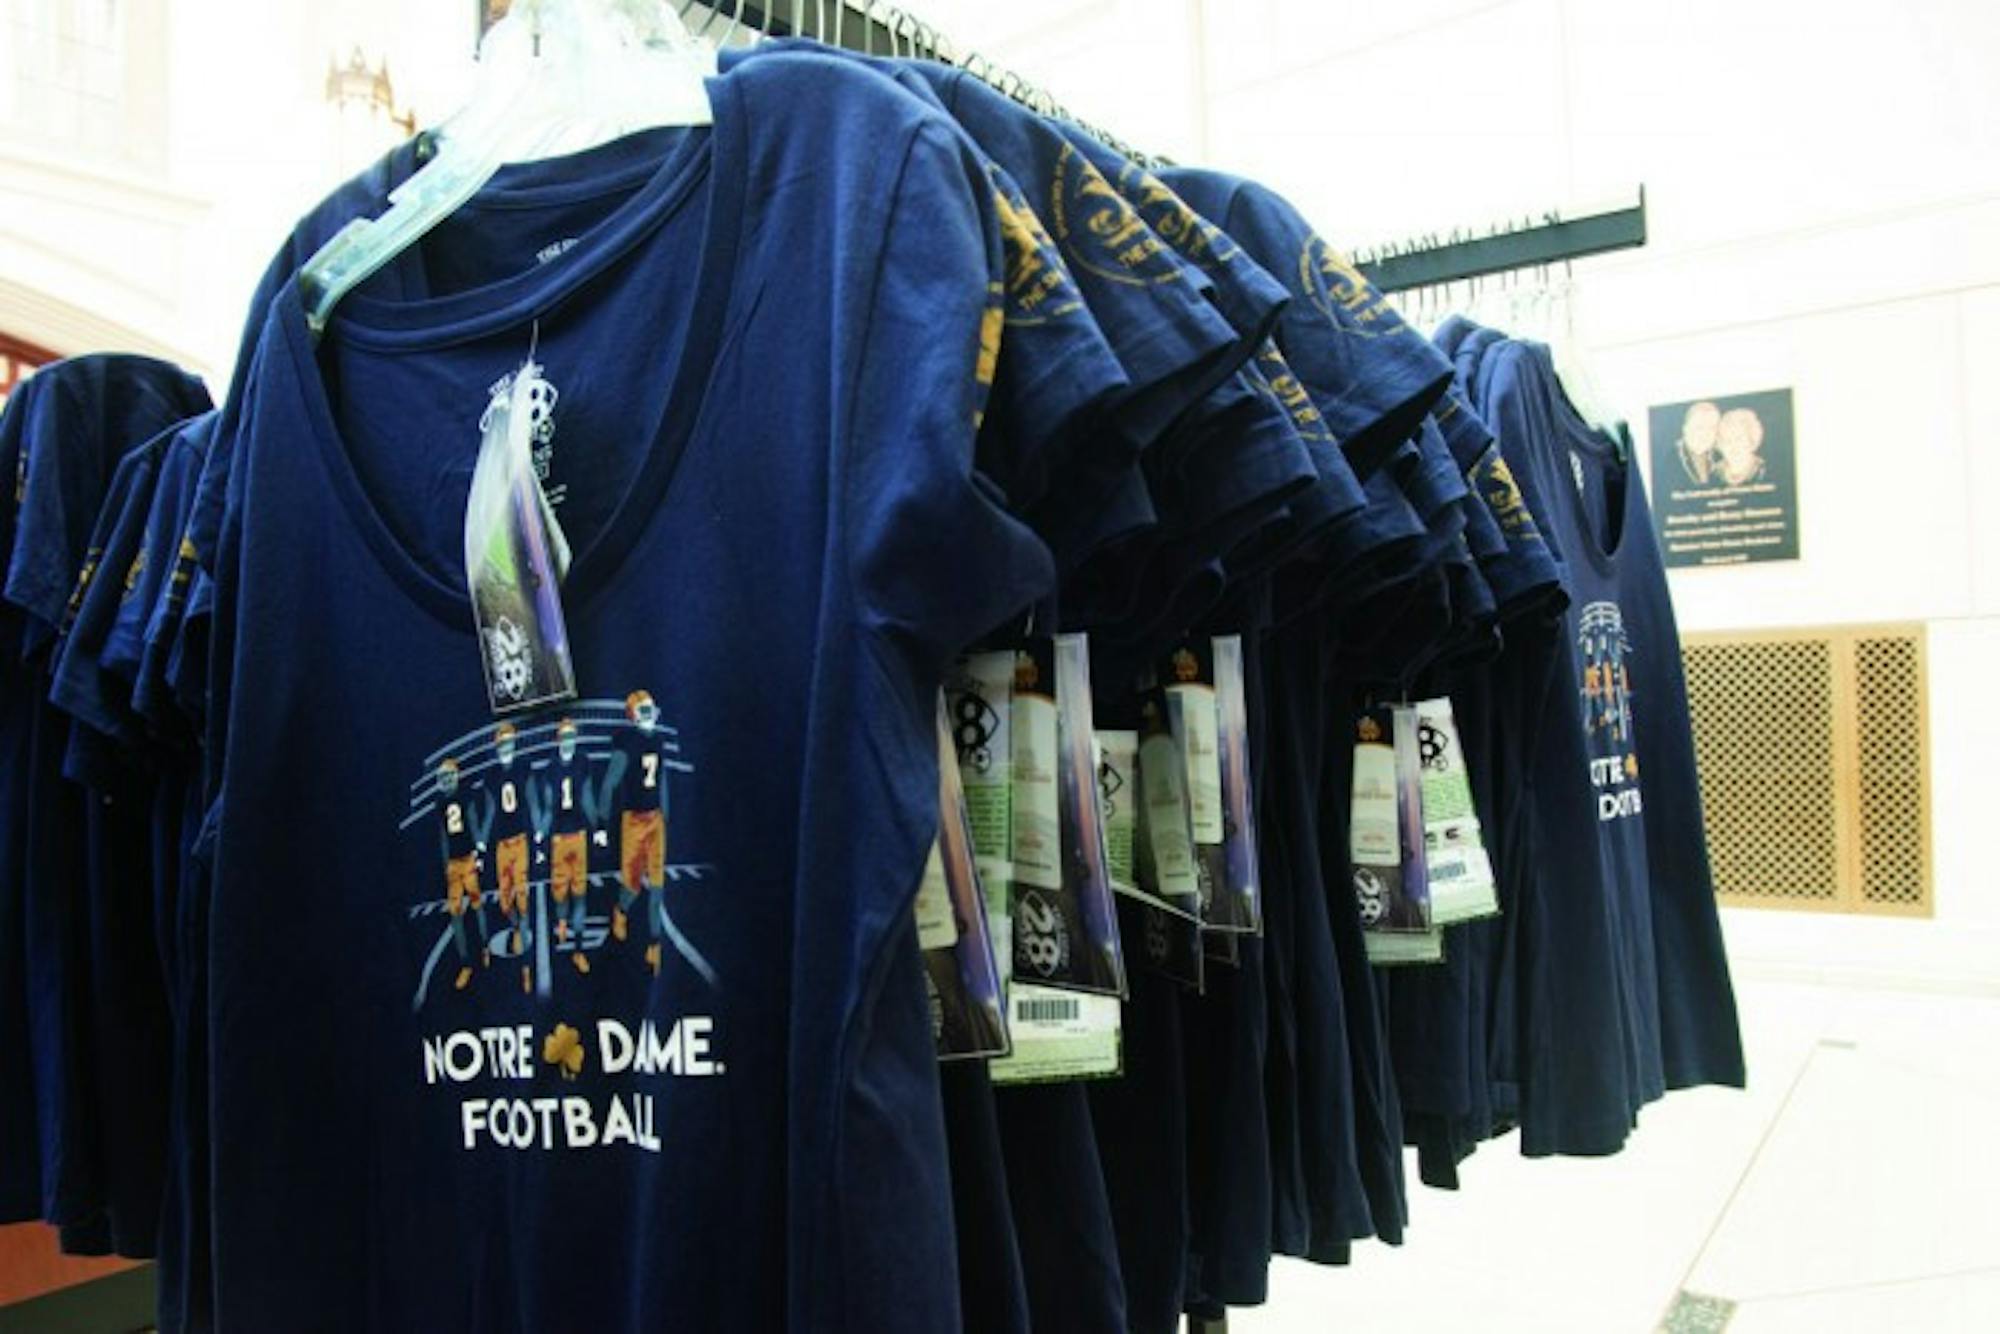 The Shirt committee works year-round to create a design that will appeal to the entire Notre Dame community.